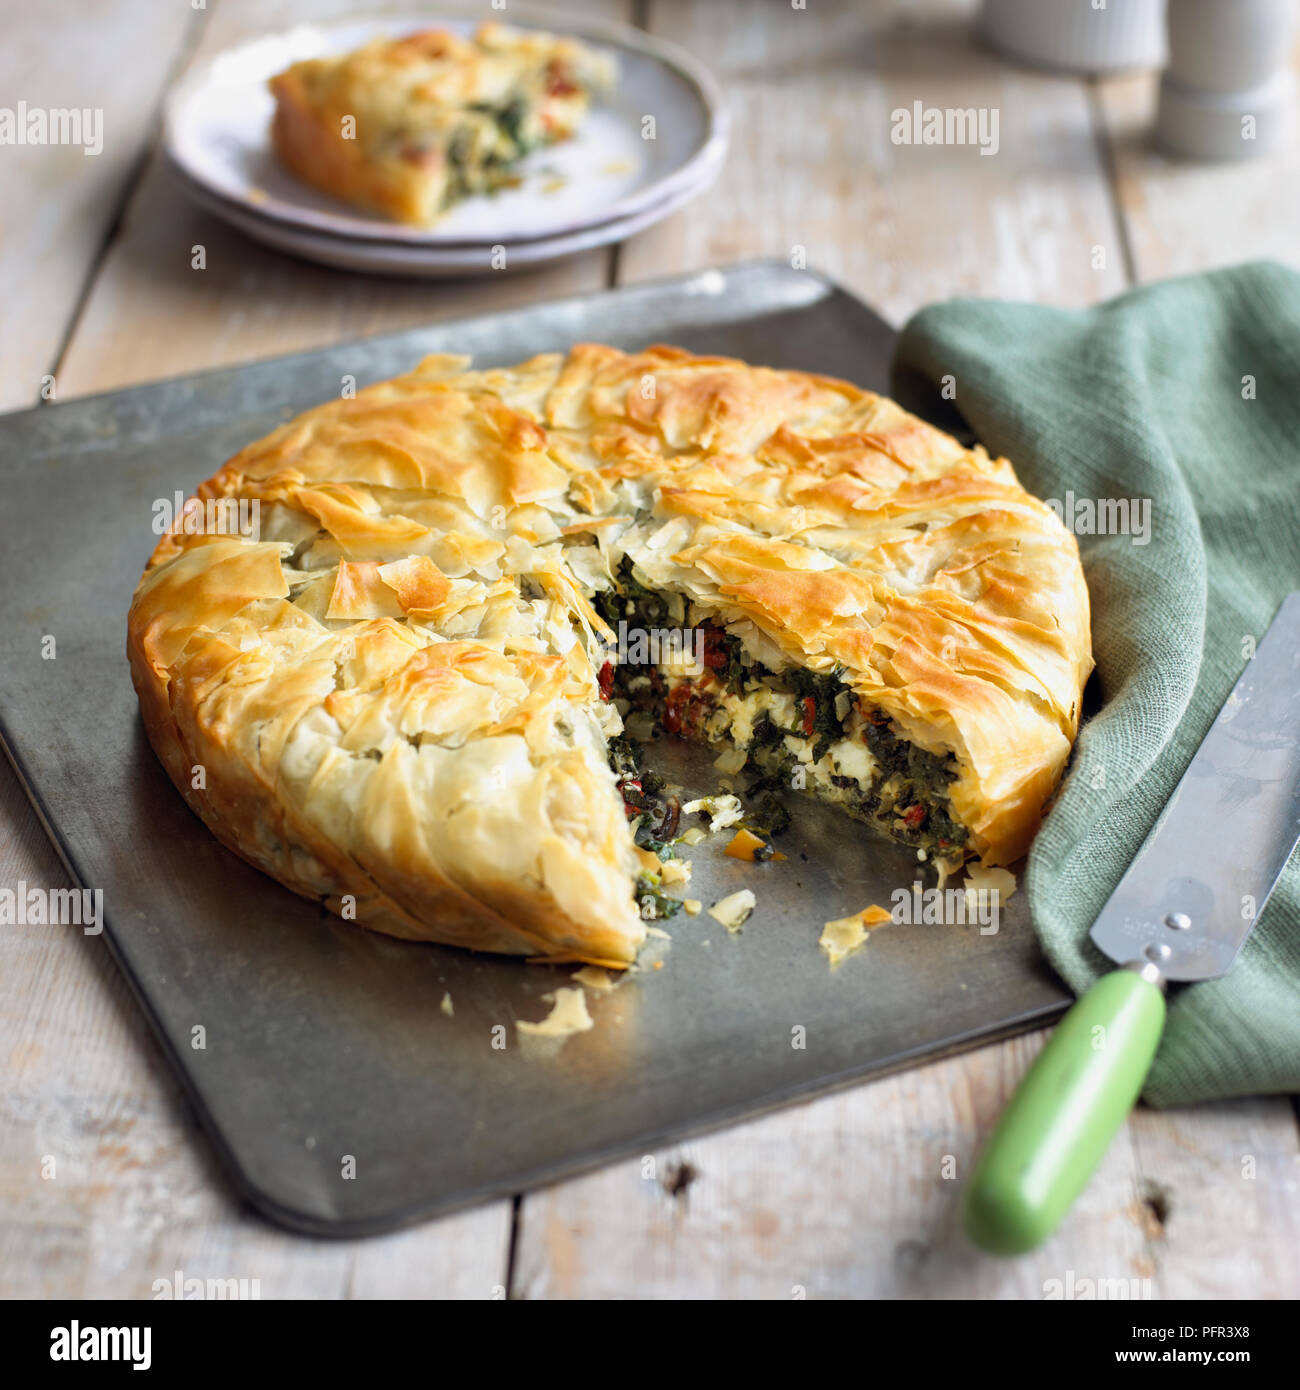 Herby feta filo pie with slice removed, spatula or palette knife nearby Stock Photo